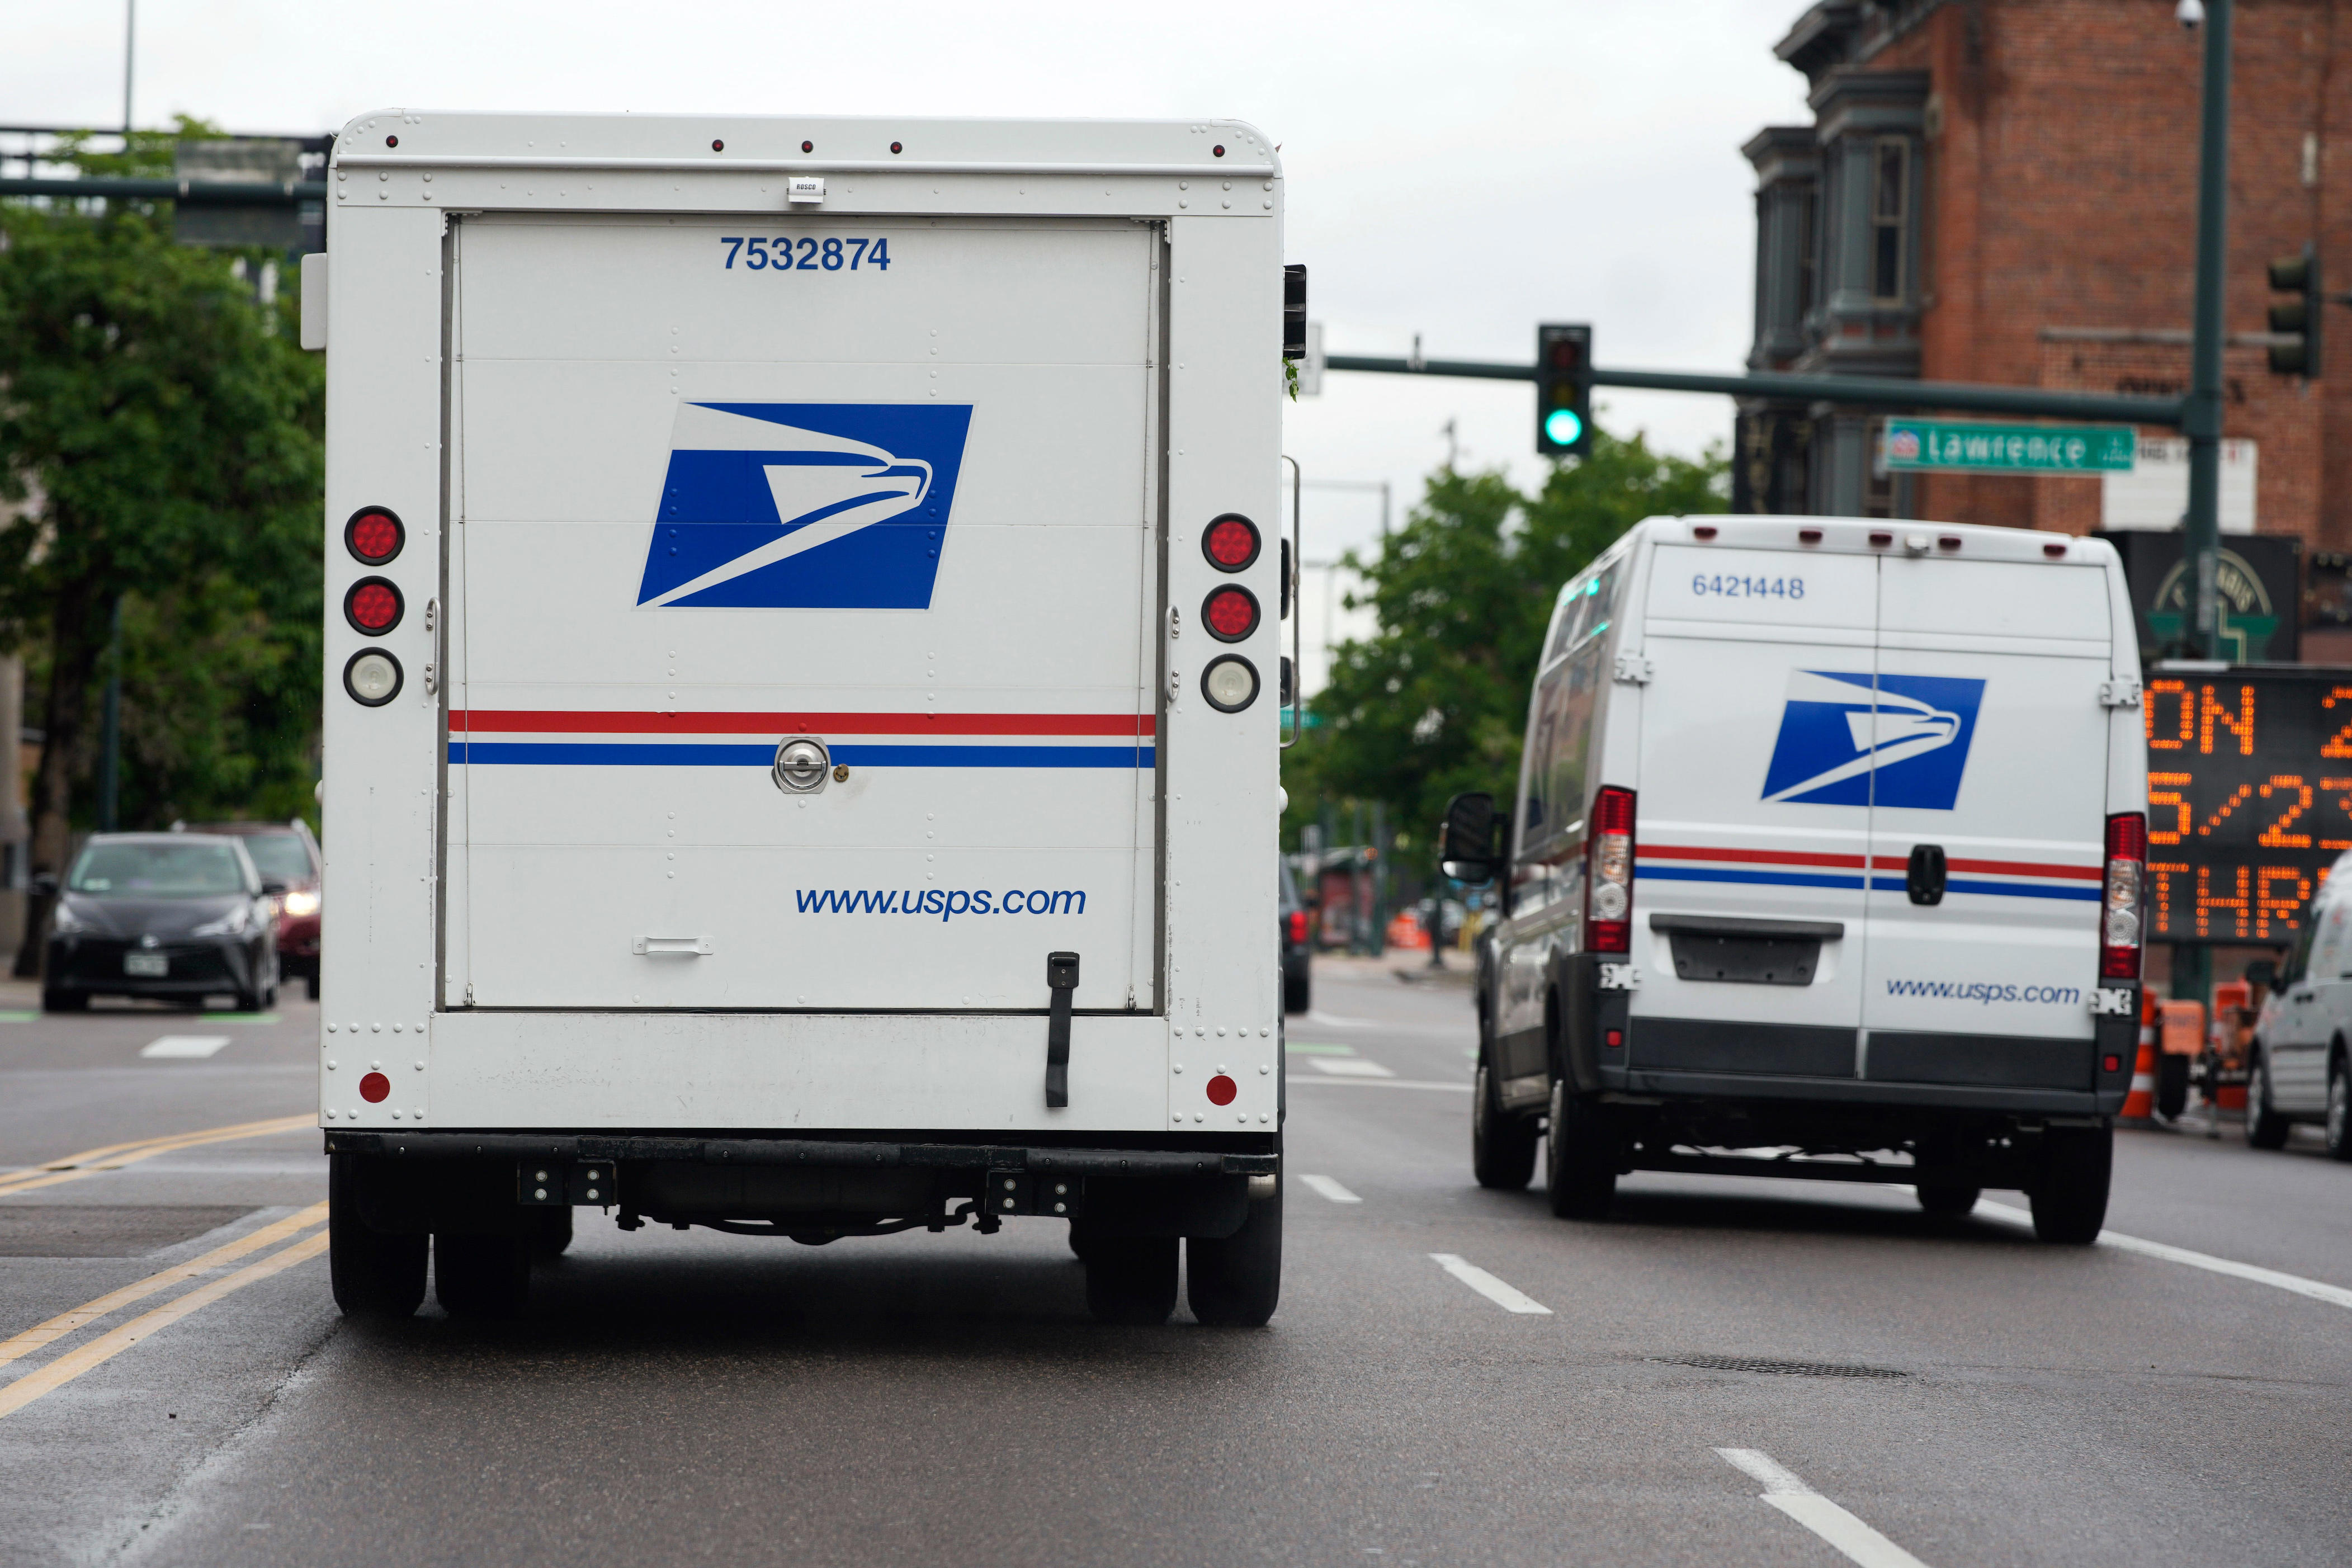 Is UPS, USPS, FedEx delivering on Labor Day? Are banks, post offices